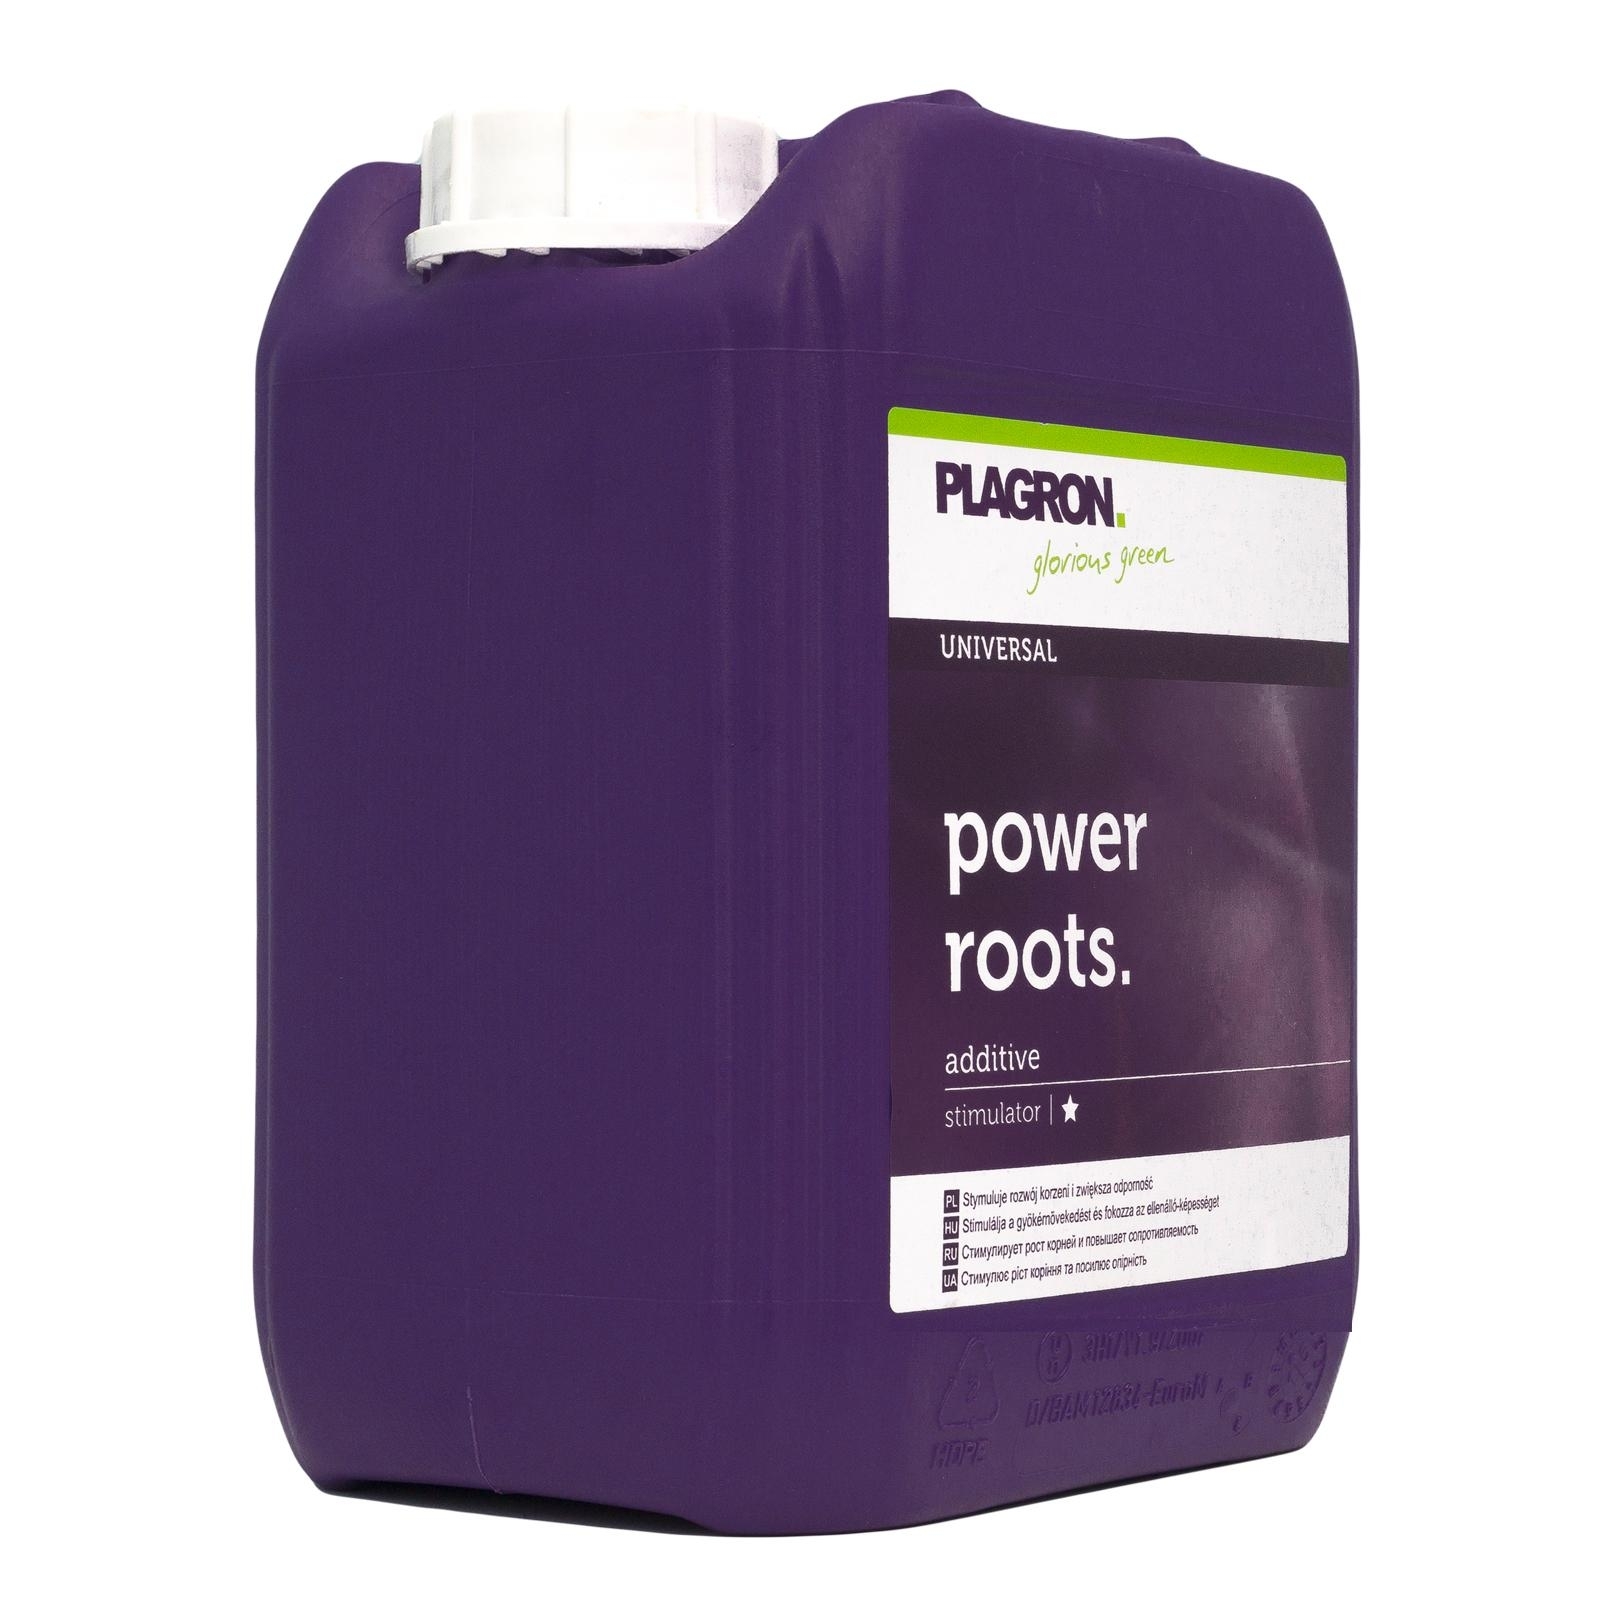 Plagron Power roots 5л. Plagron Pure Enzyme 5l. Стимулятор Plagron Pure zym 500. Стимулятор Plagron Pure zym 100. Рут пауэр